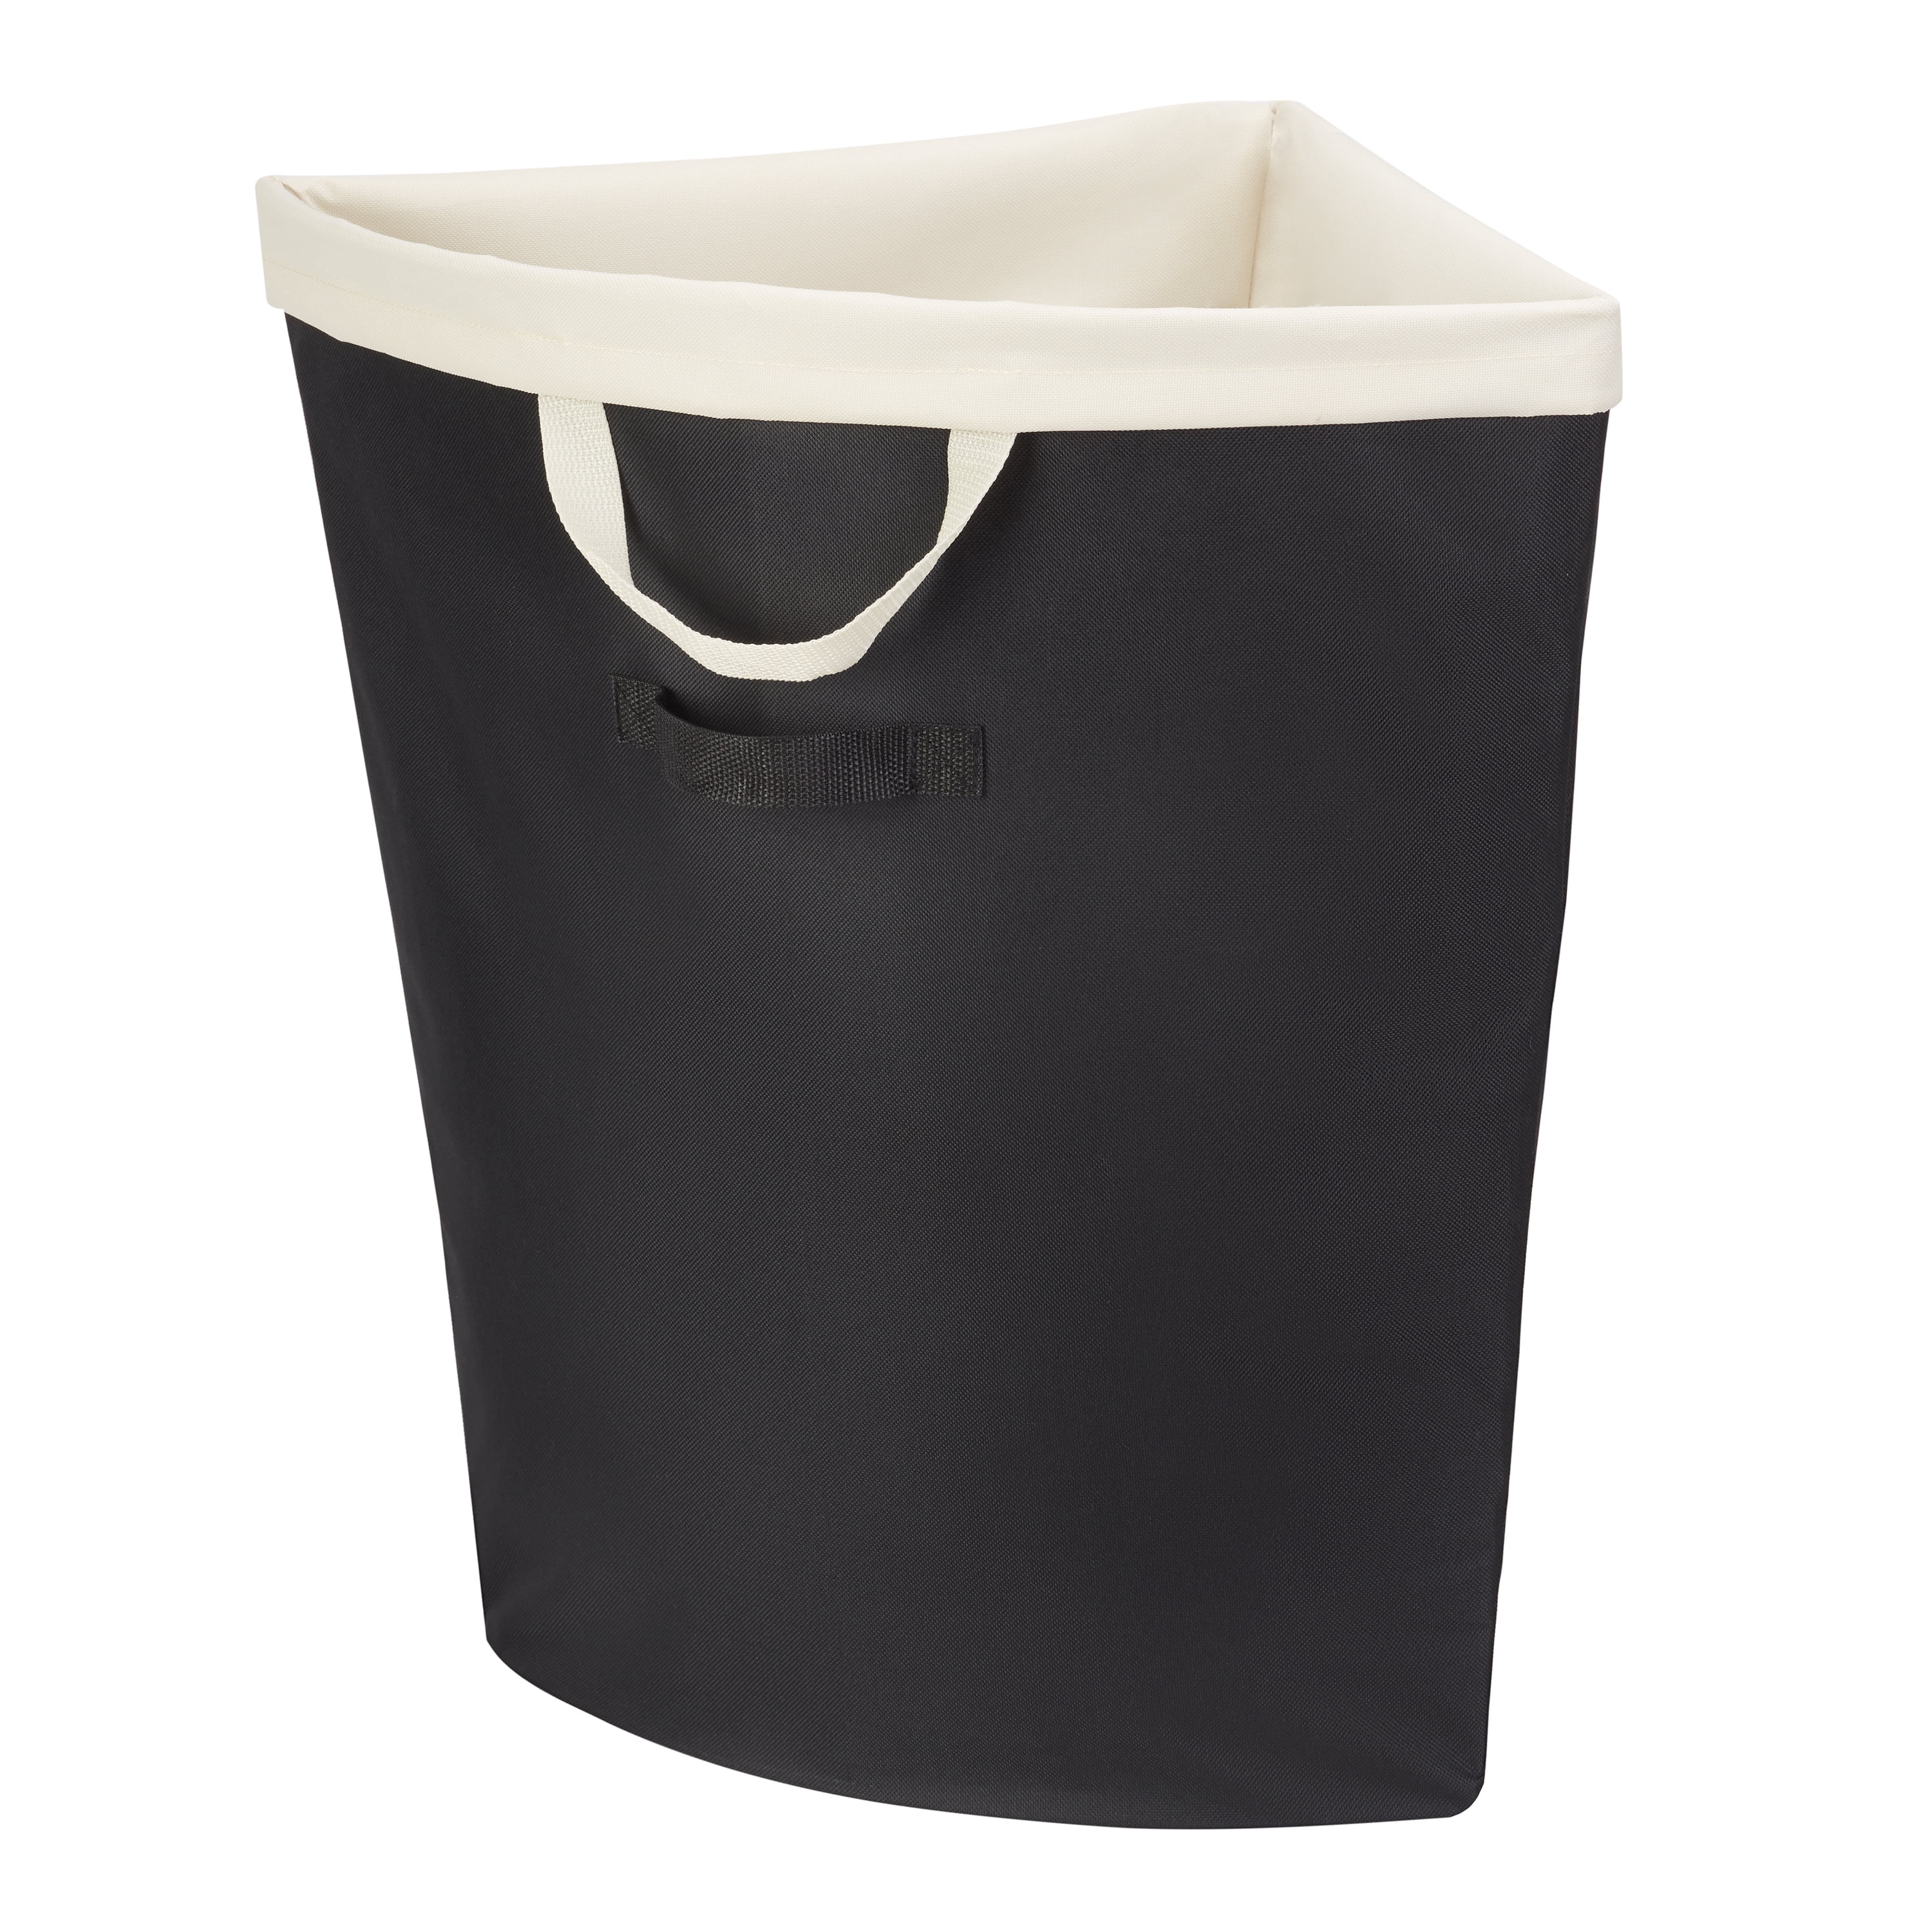 Mainstays Durable Fabric Laundry Hamper, Black and Ivory